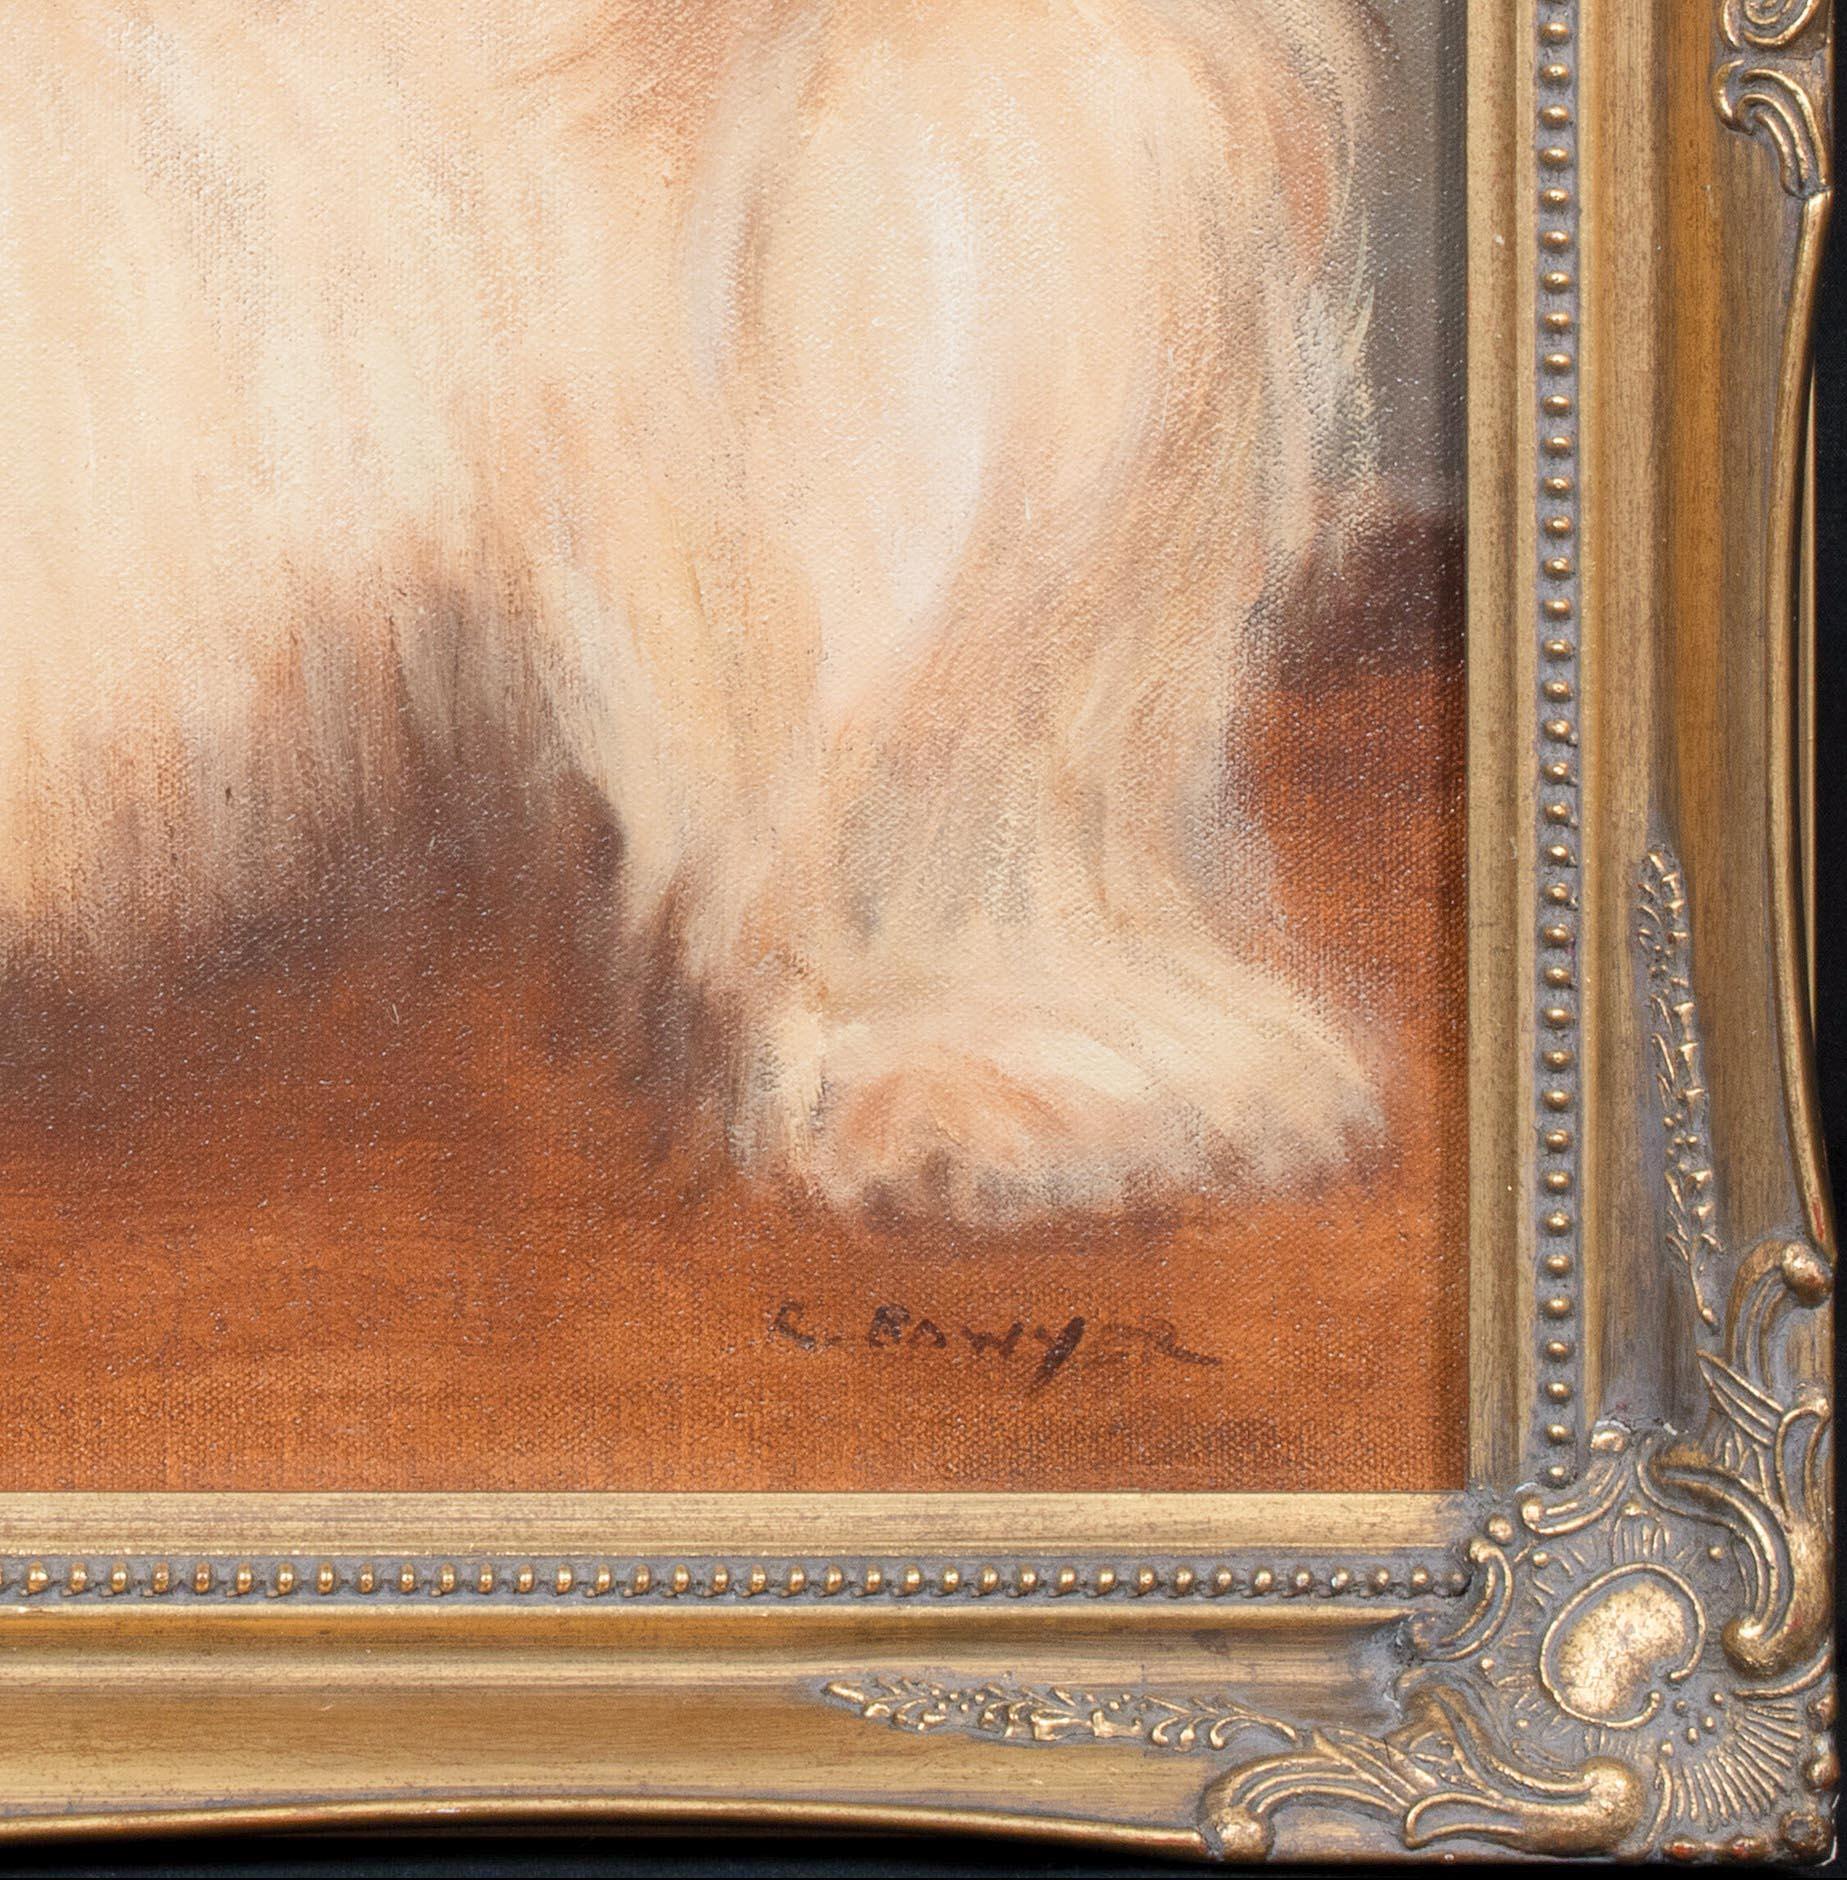 Portrait Of A Lhasa Apso, 20th Century

by Ruth Bowyer 

20th Century British Portrait Of A Lhasa Apso dog, oil on canvas by Ruth Bowyer. Good quality and condition, framed and signed.

Measurements: 23